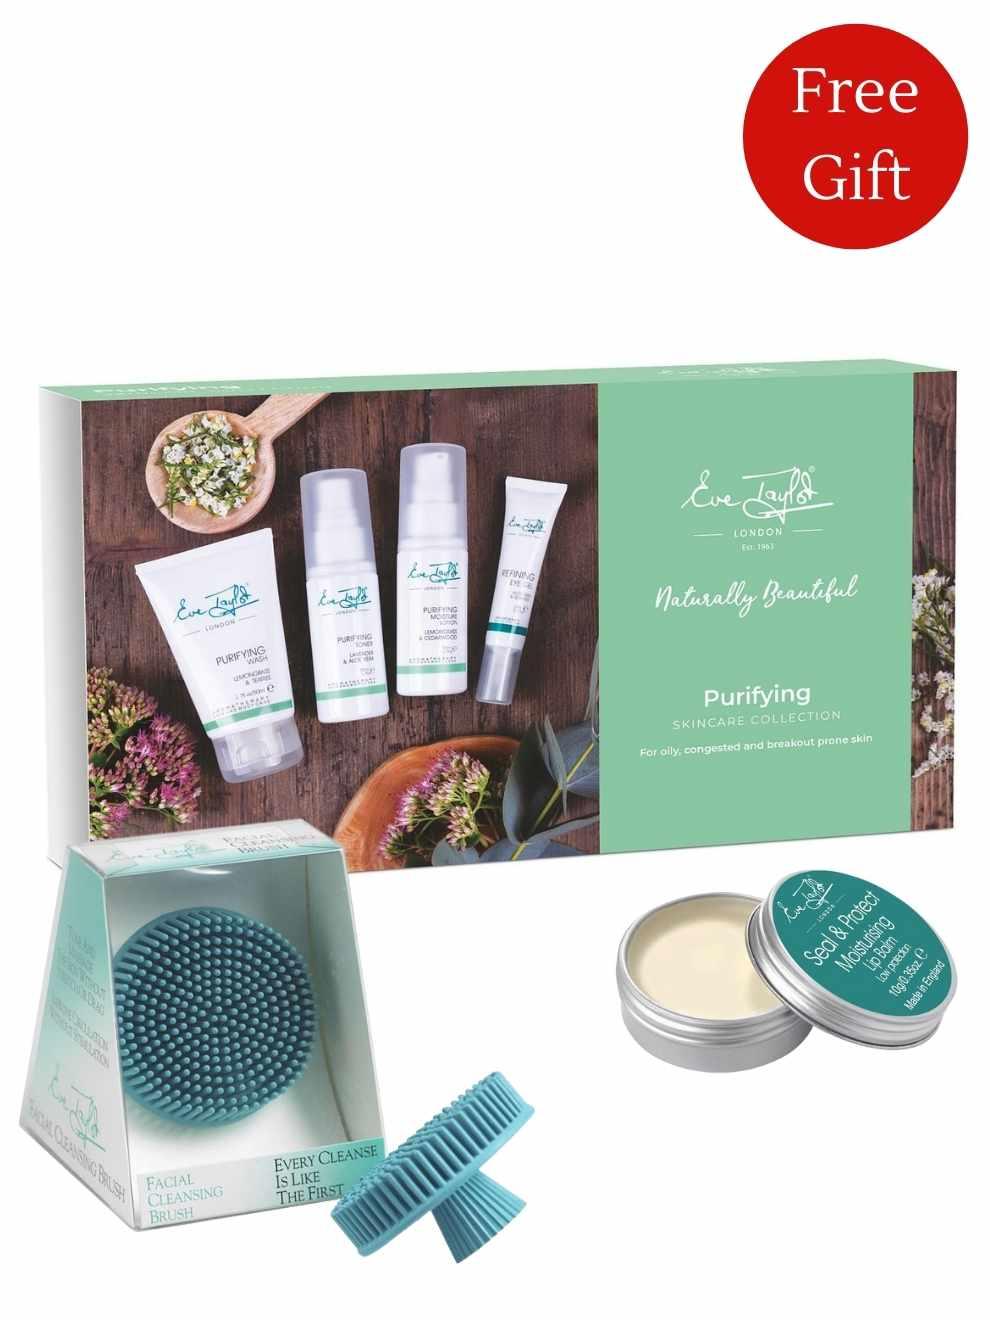 Eve Taylor Purifying Skincare Collection Bundle Gift Set